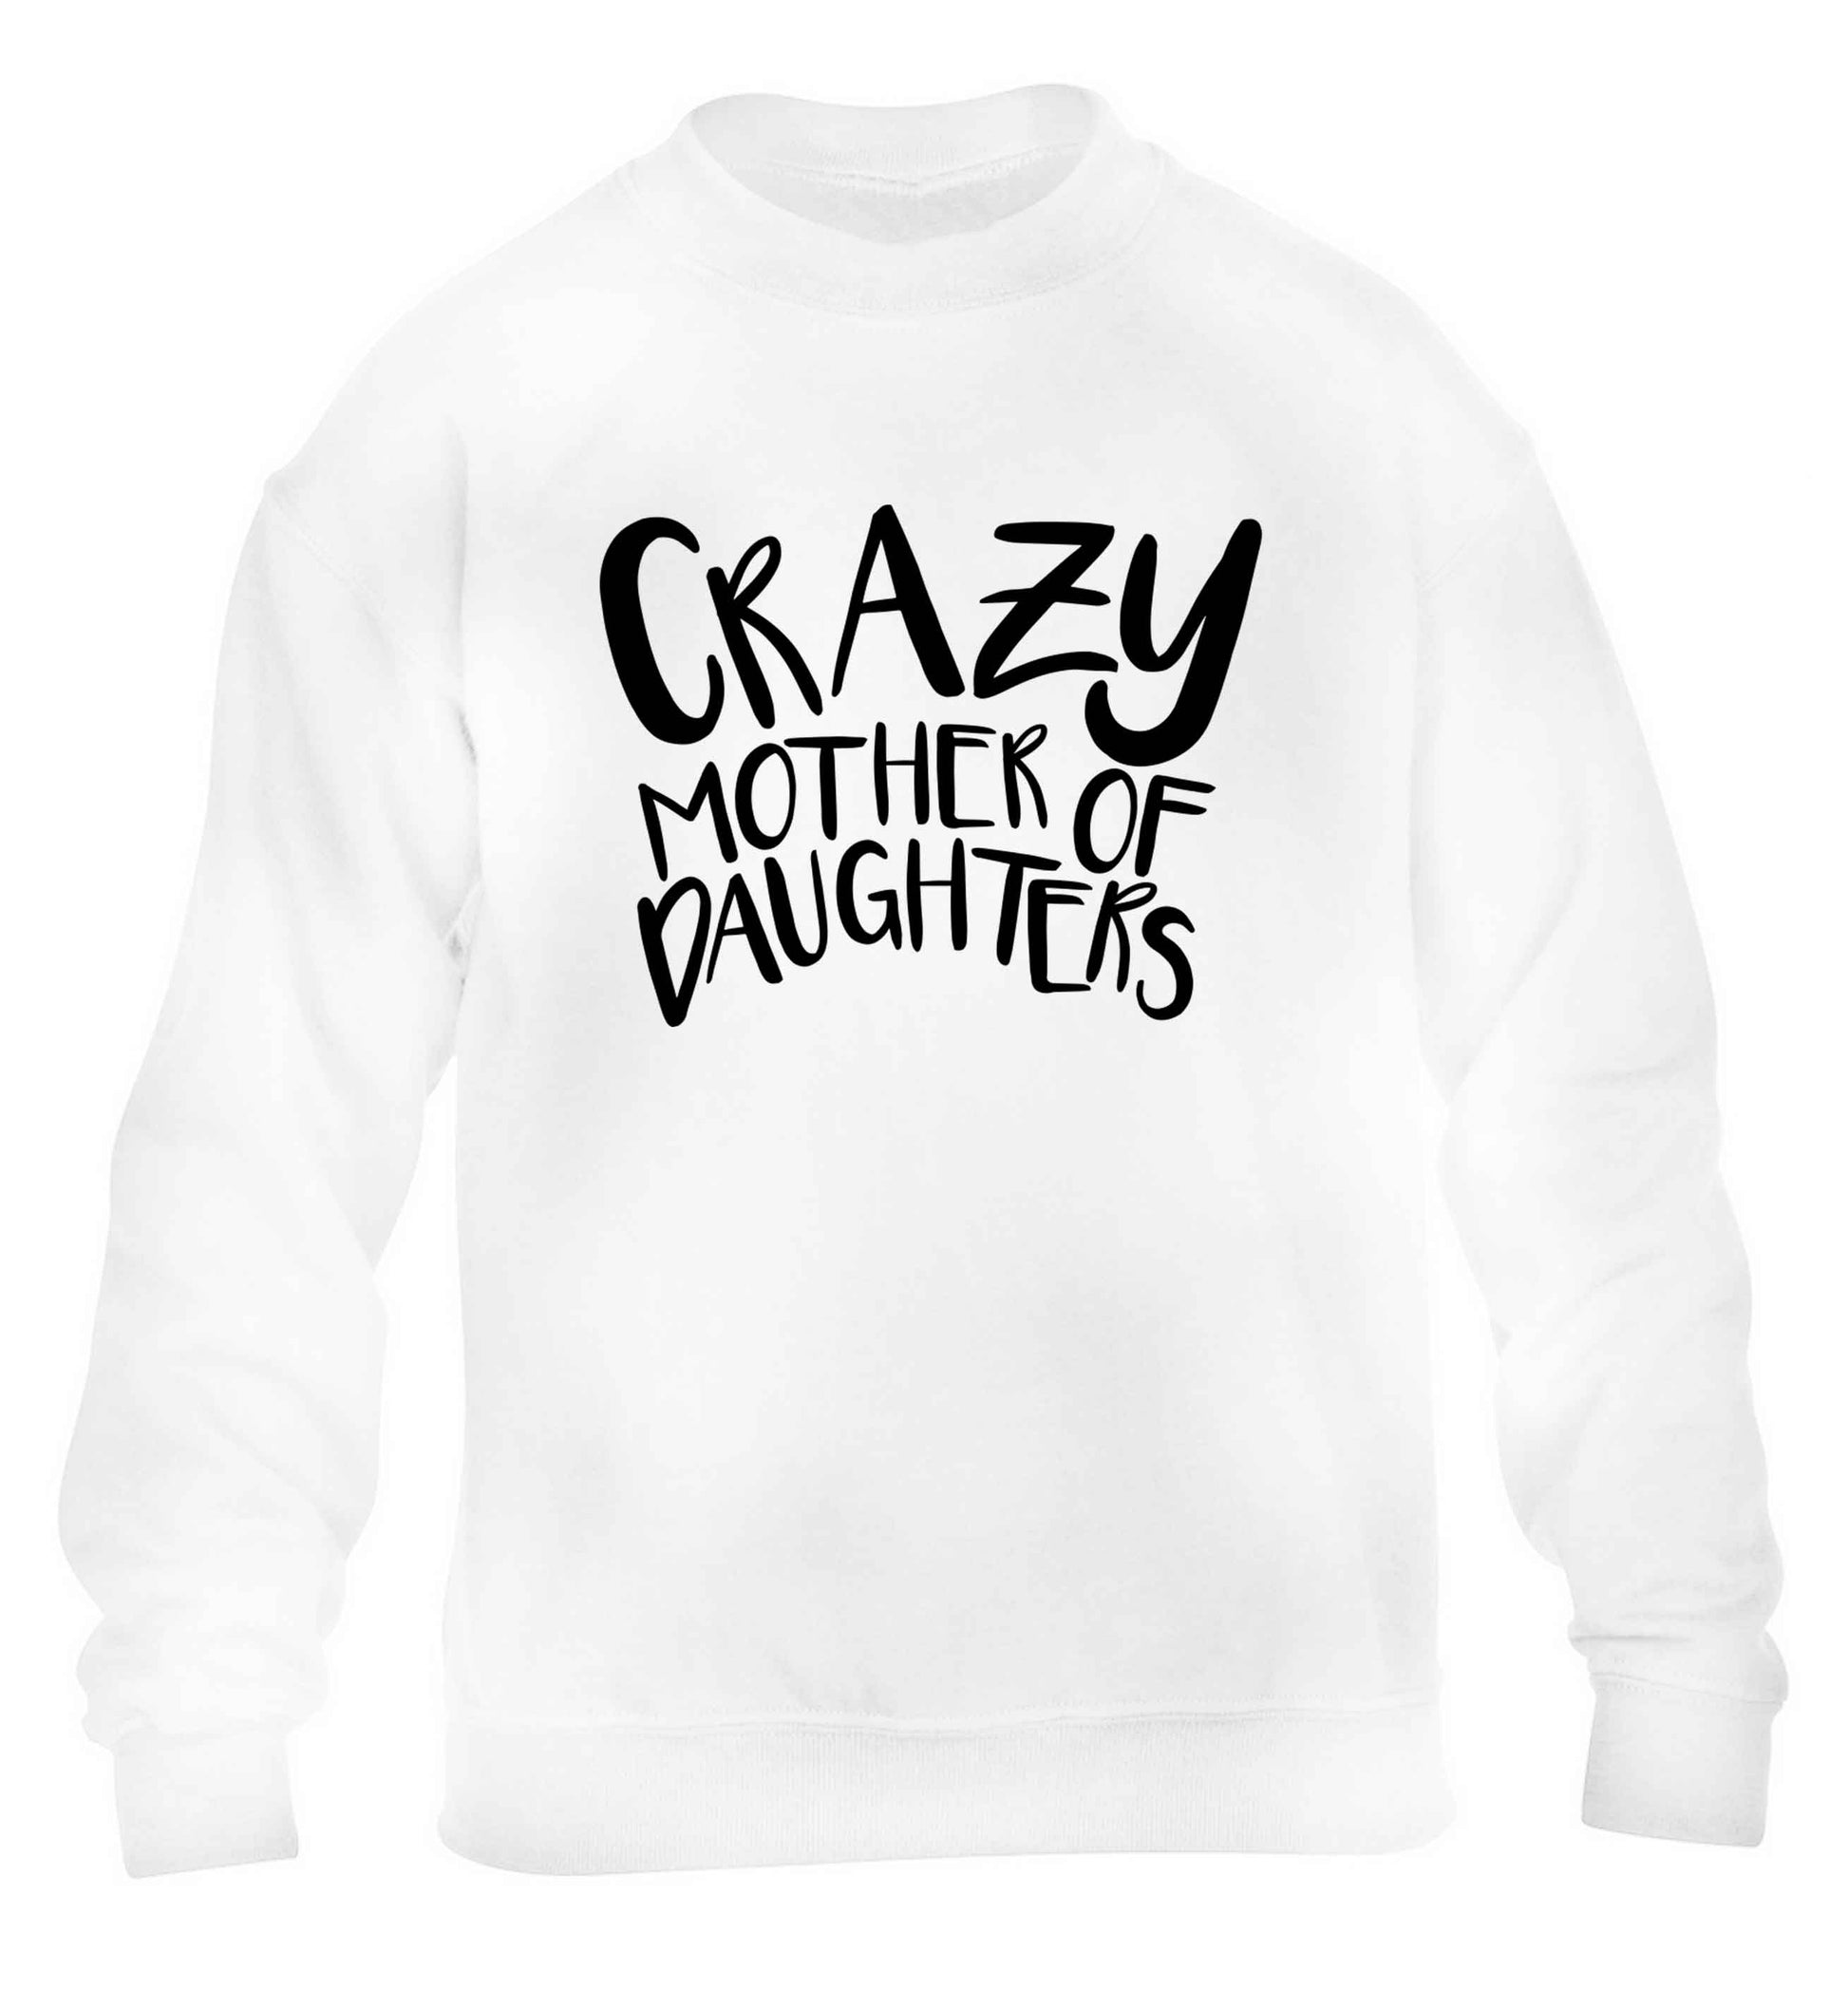 Crazy mother of daughters children's white sweater 12-13 Years